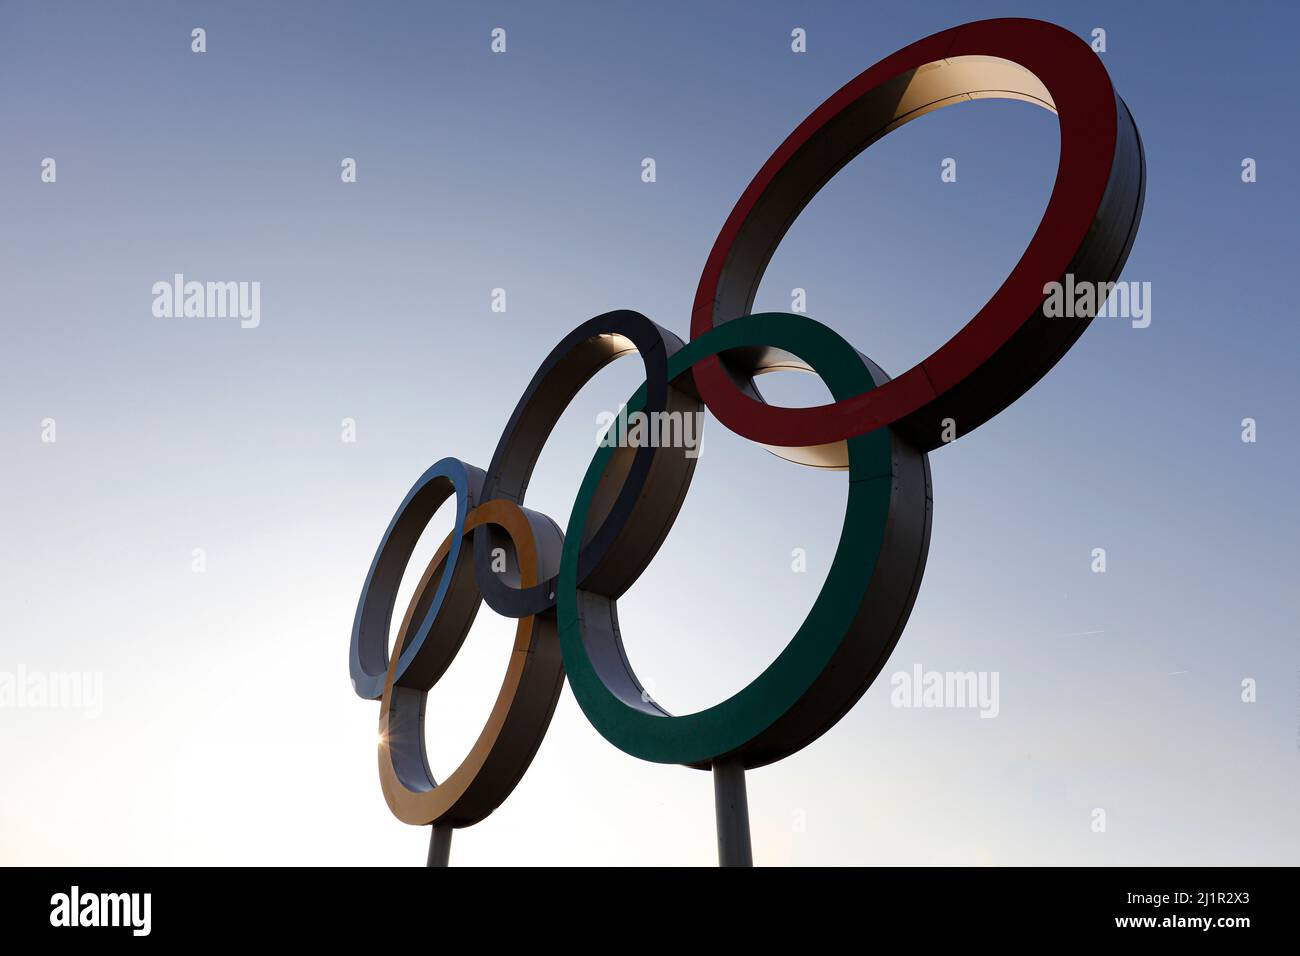 26th March 2022 ; Olympic Rings Lee Valley, Stratford England; Reflection of the locations used for 2012 Summer Olympics London; Olympic rings symbol at Queen Elizabeth Olympic Park Stock Photo